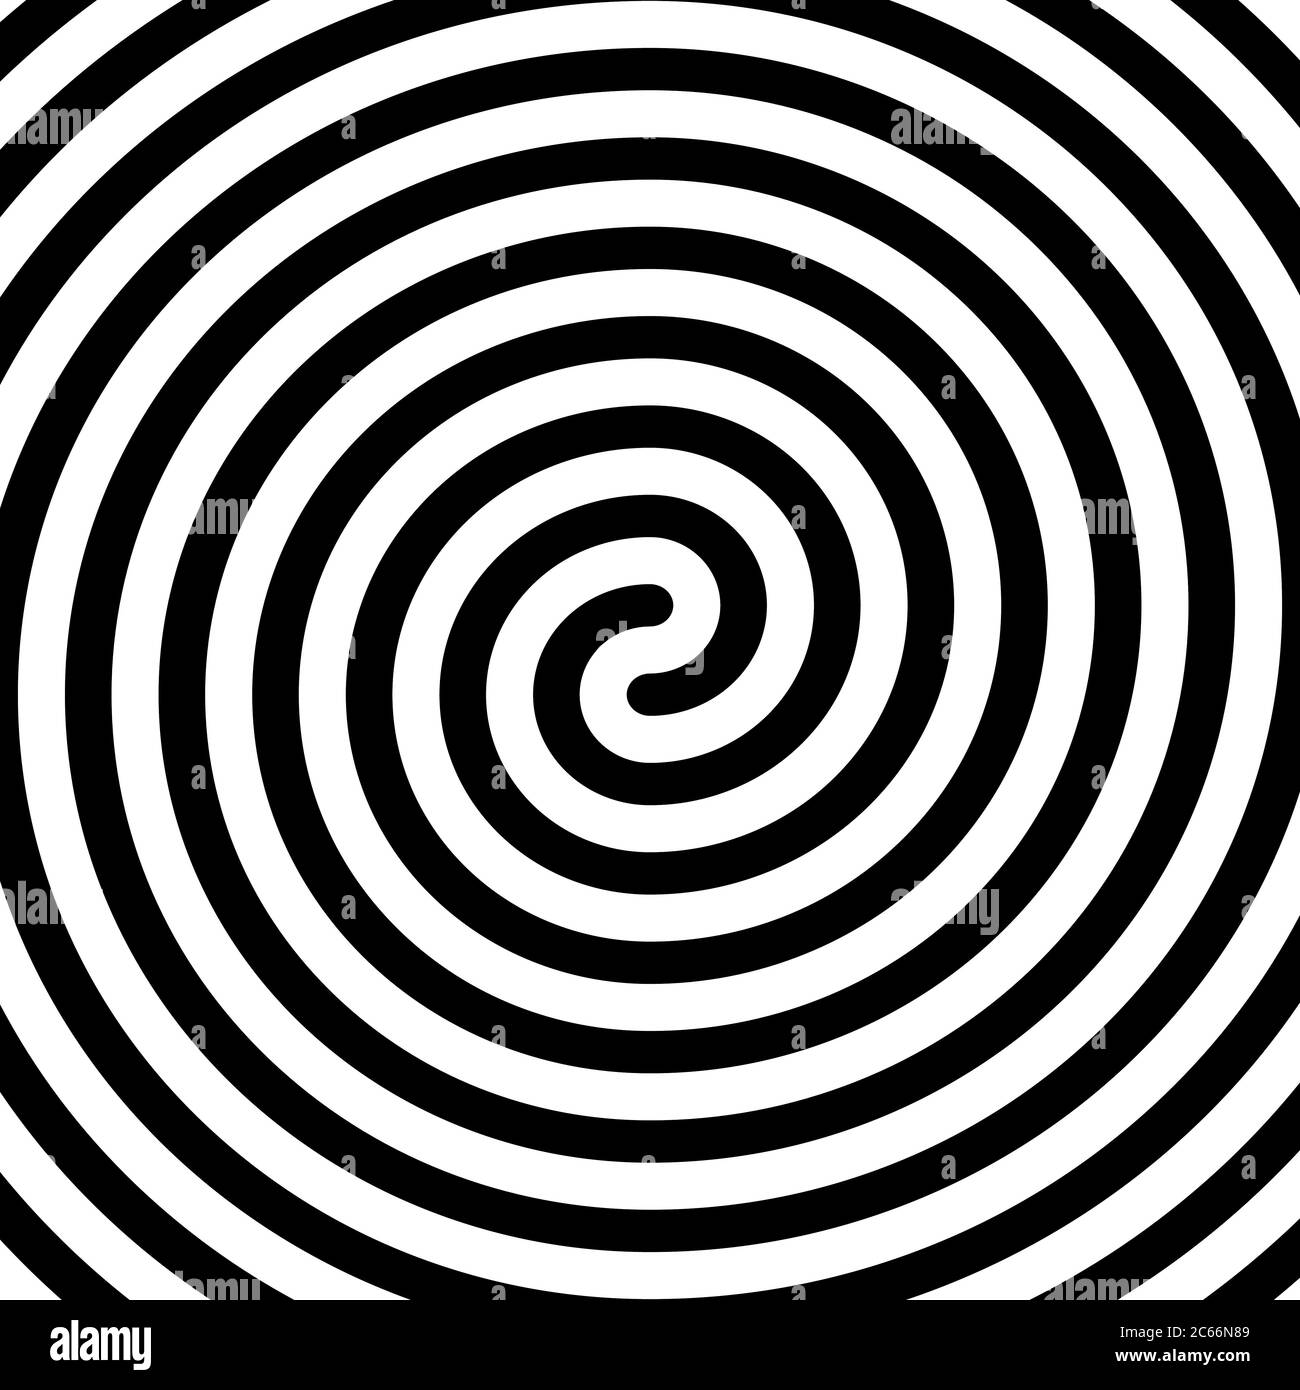 Thick black double spiral symbol. Simple flat vector design element. Stock Vector